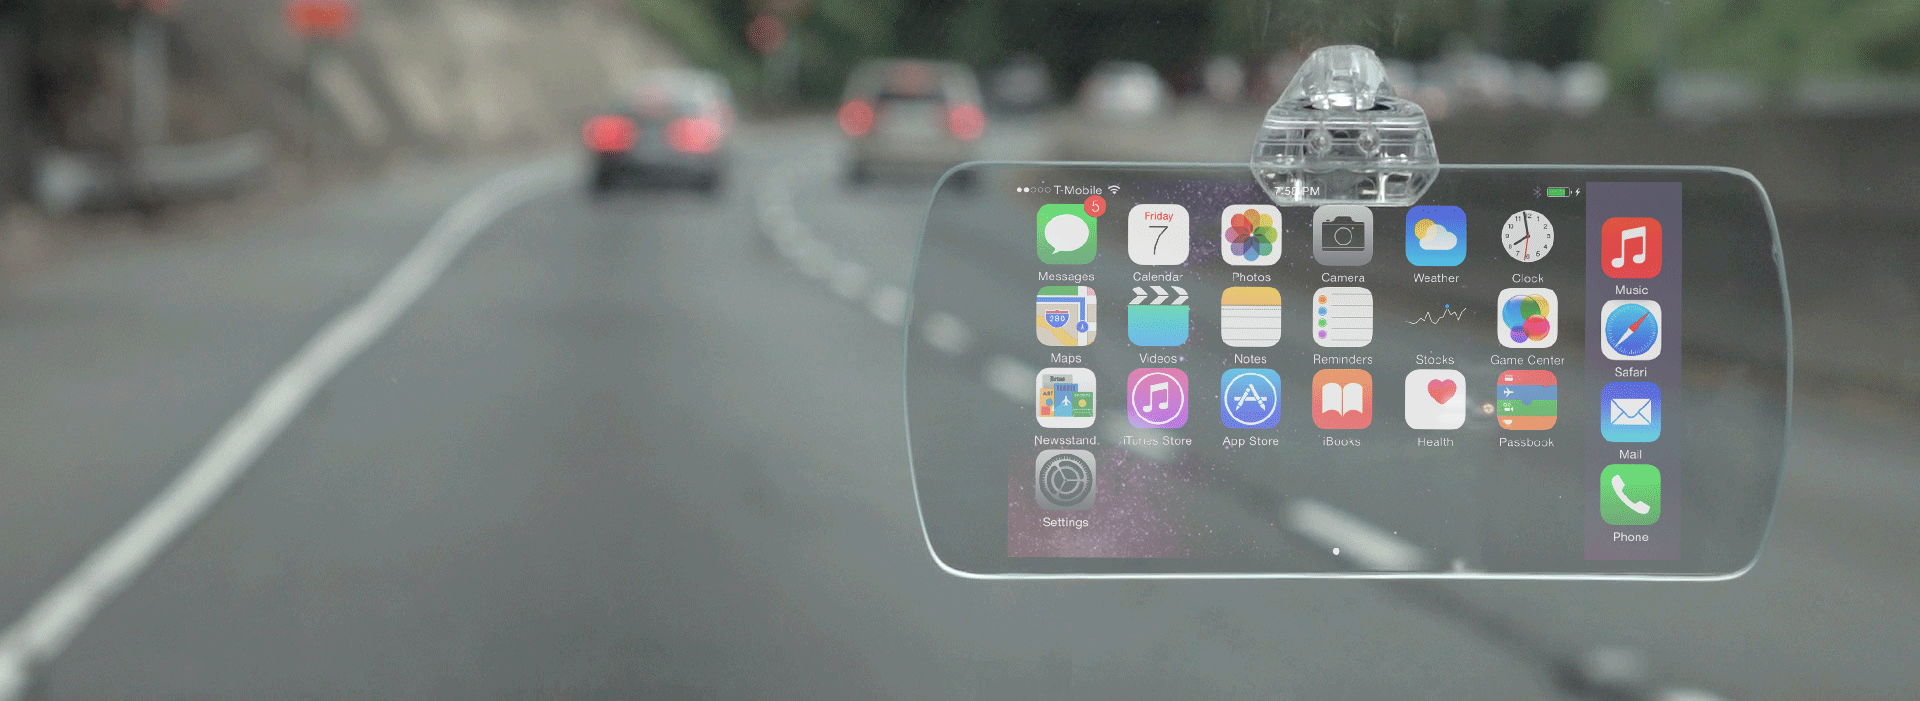 Hudly Puts Your iPhone (or iPad) Display On Your Car Windshield  $50 off!!!